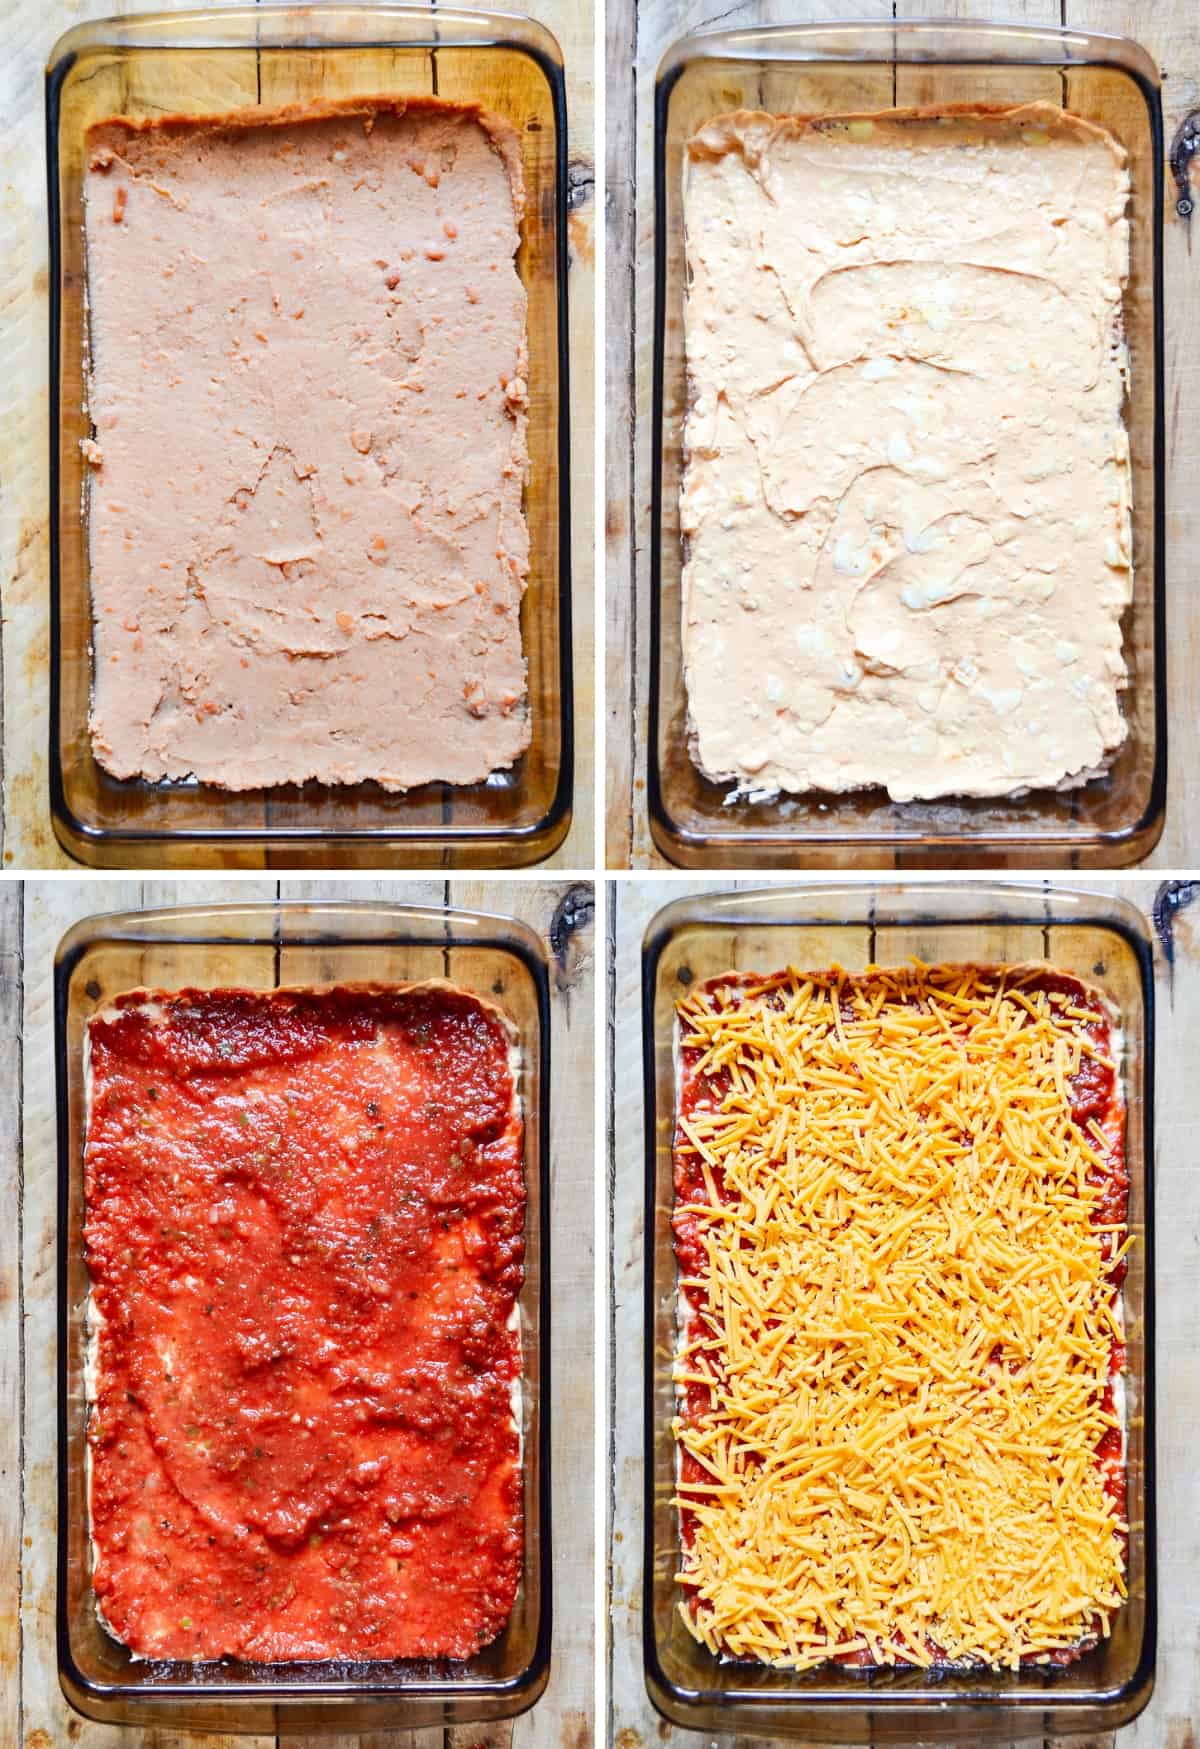 Assembling the layers of the dip in a baking dish.